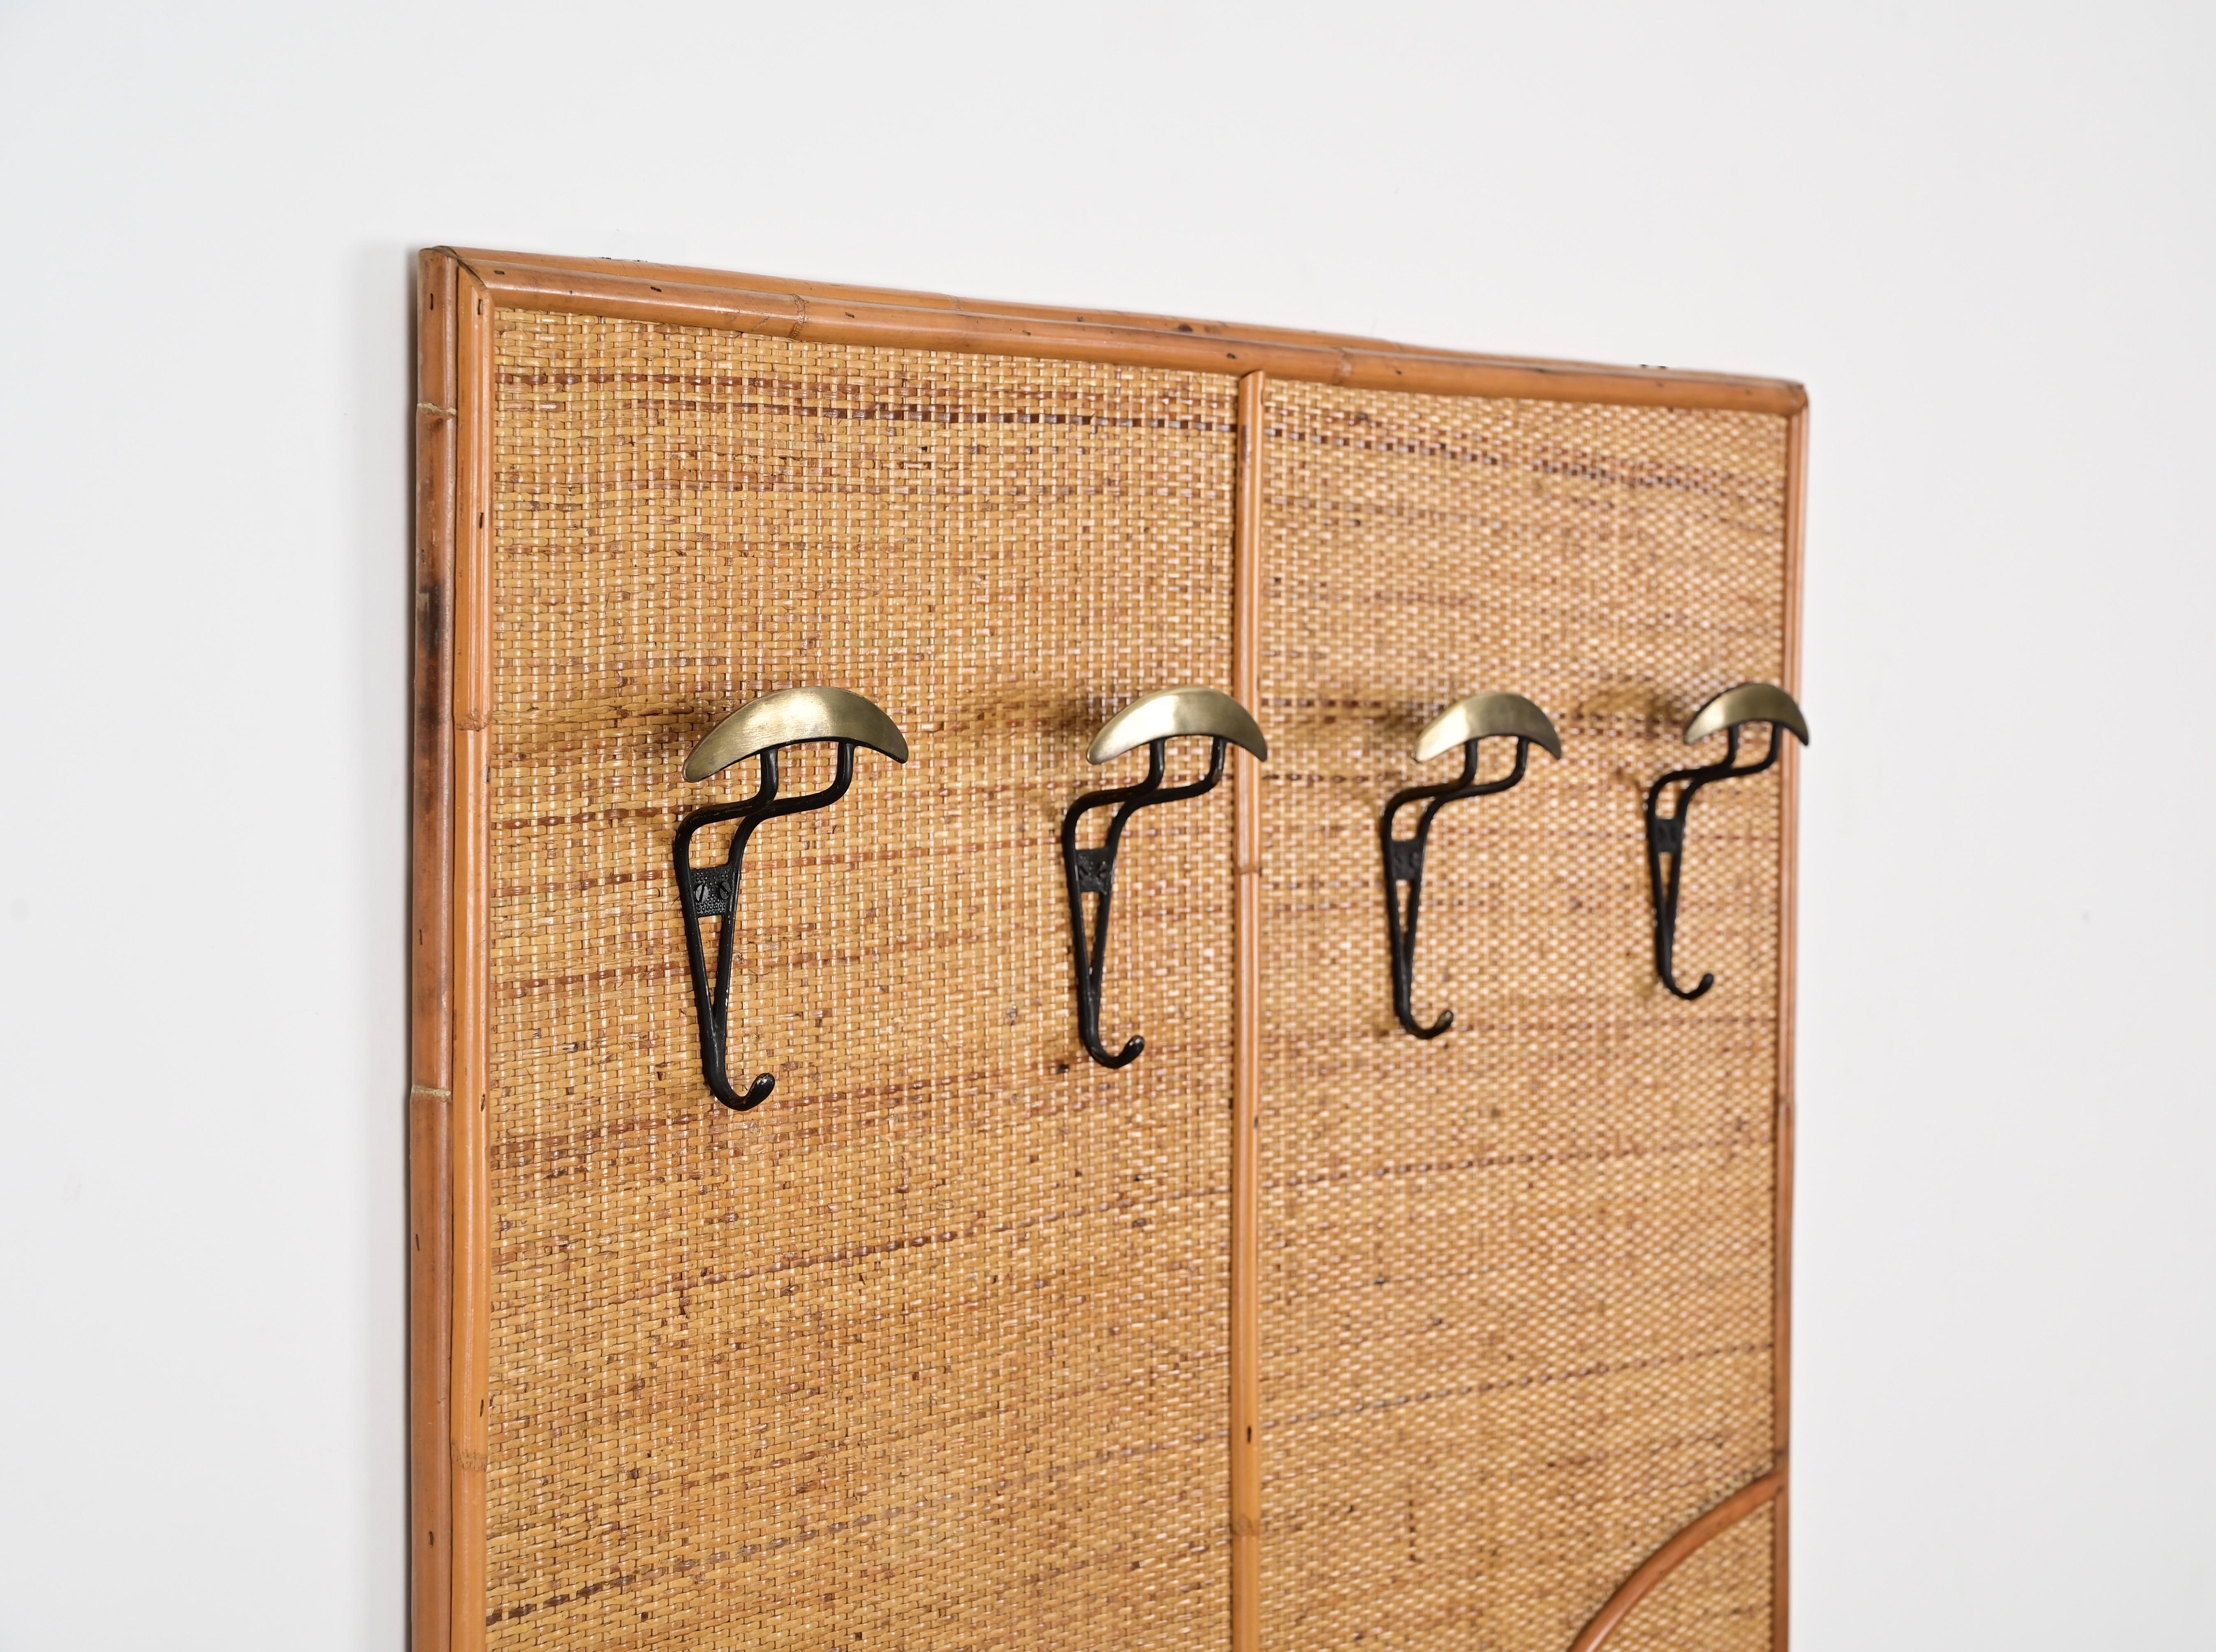 Vivai Del Sud Italian Coat Rack in Rattan, Bamboo and Brass, Italy 1970s For Sale 6